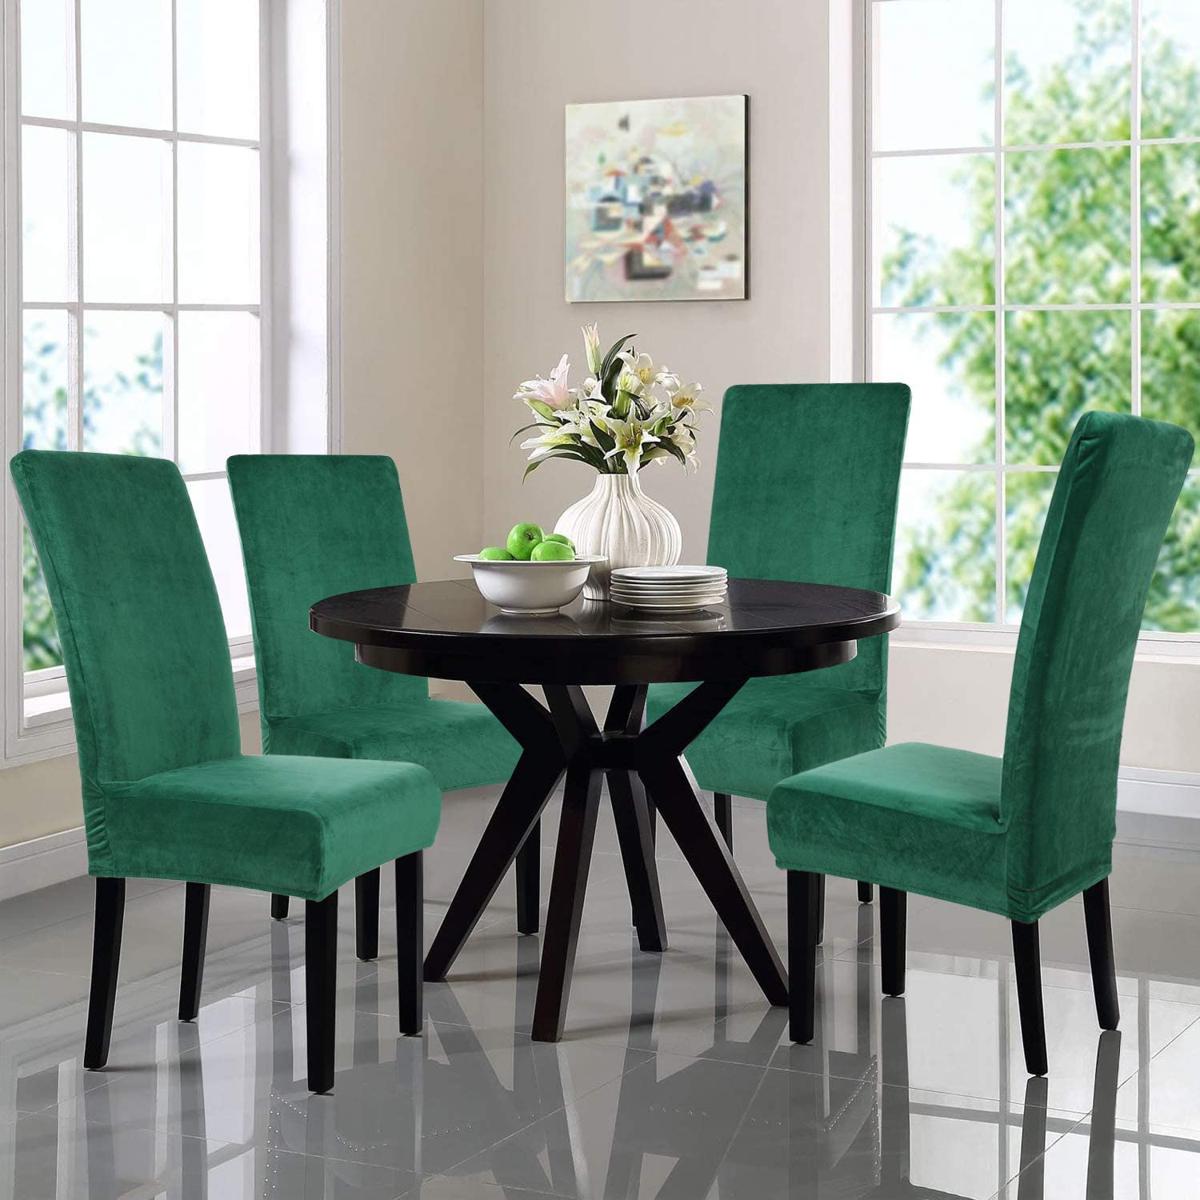 Shatex Black Stretch Dining Chair Covers Set of 4-Washable Chair